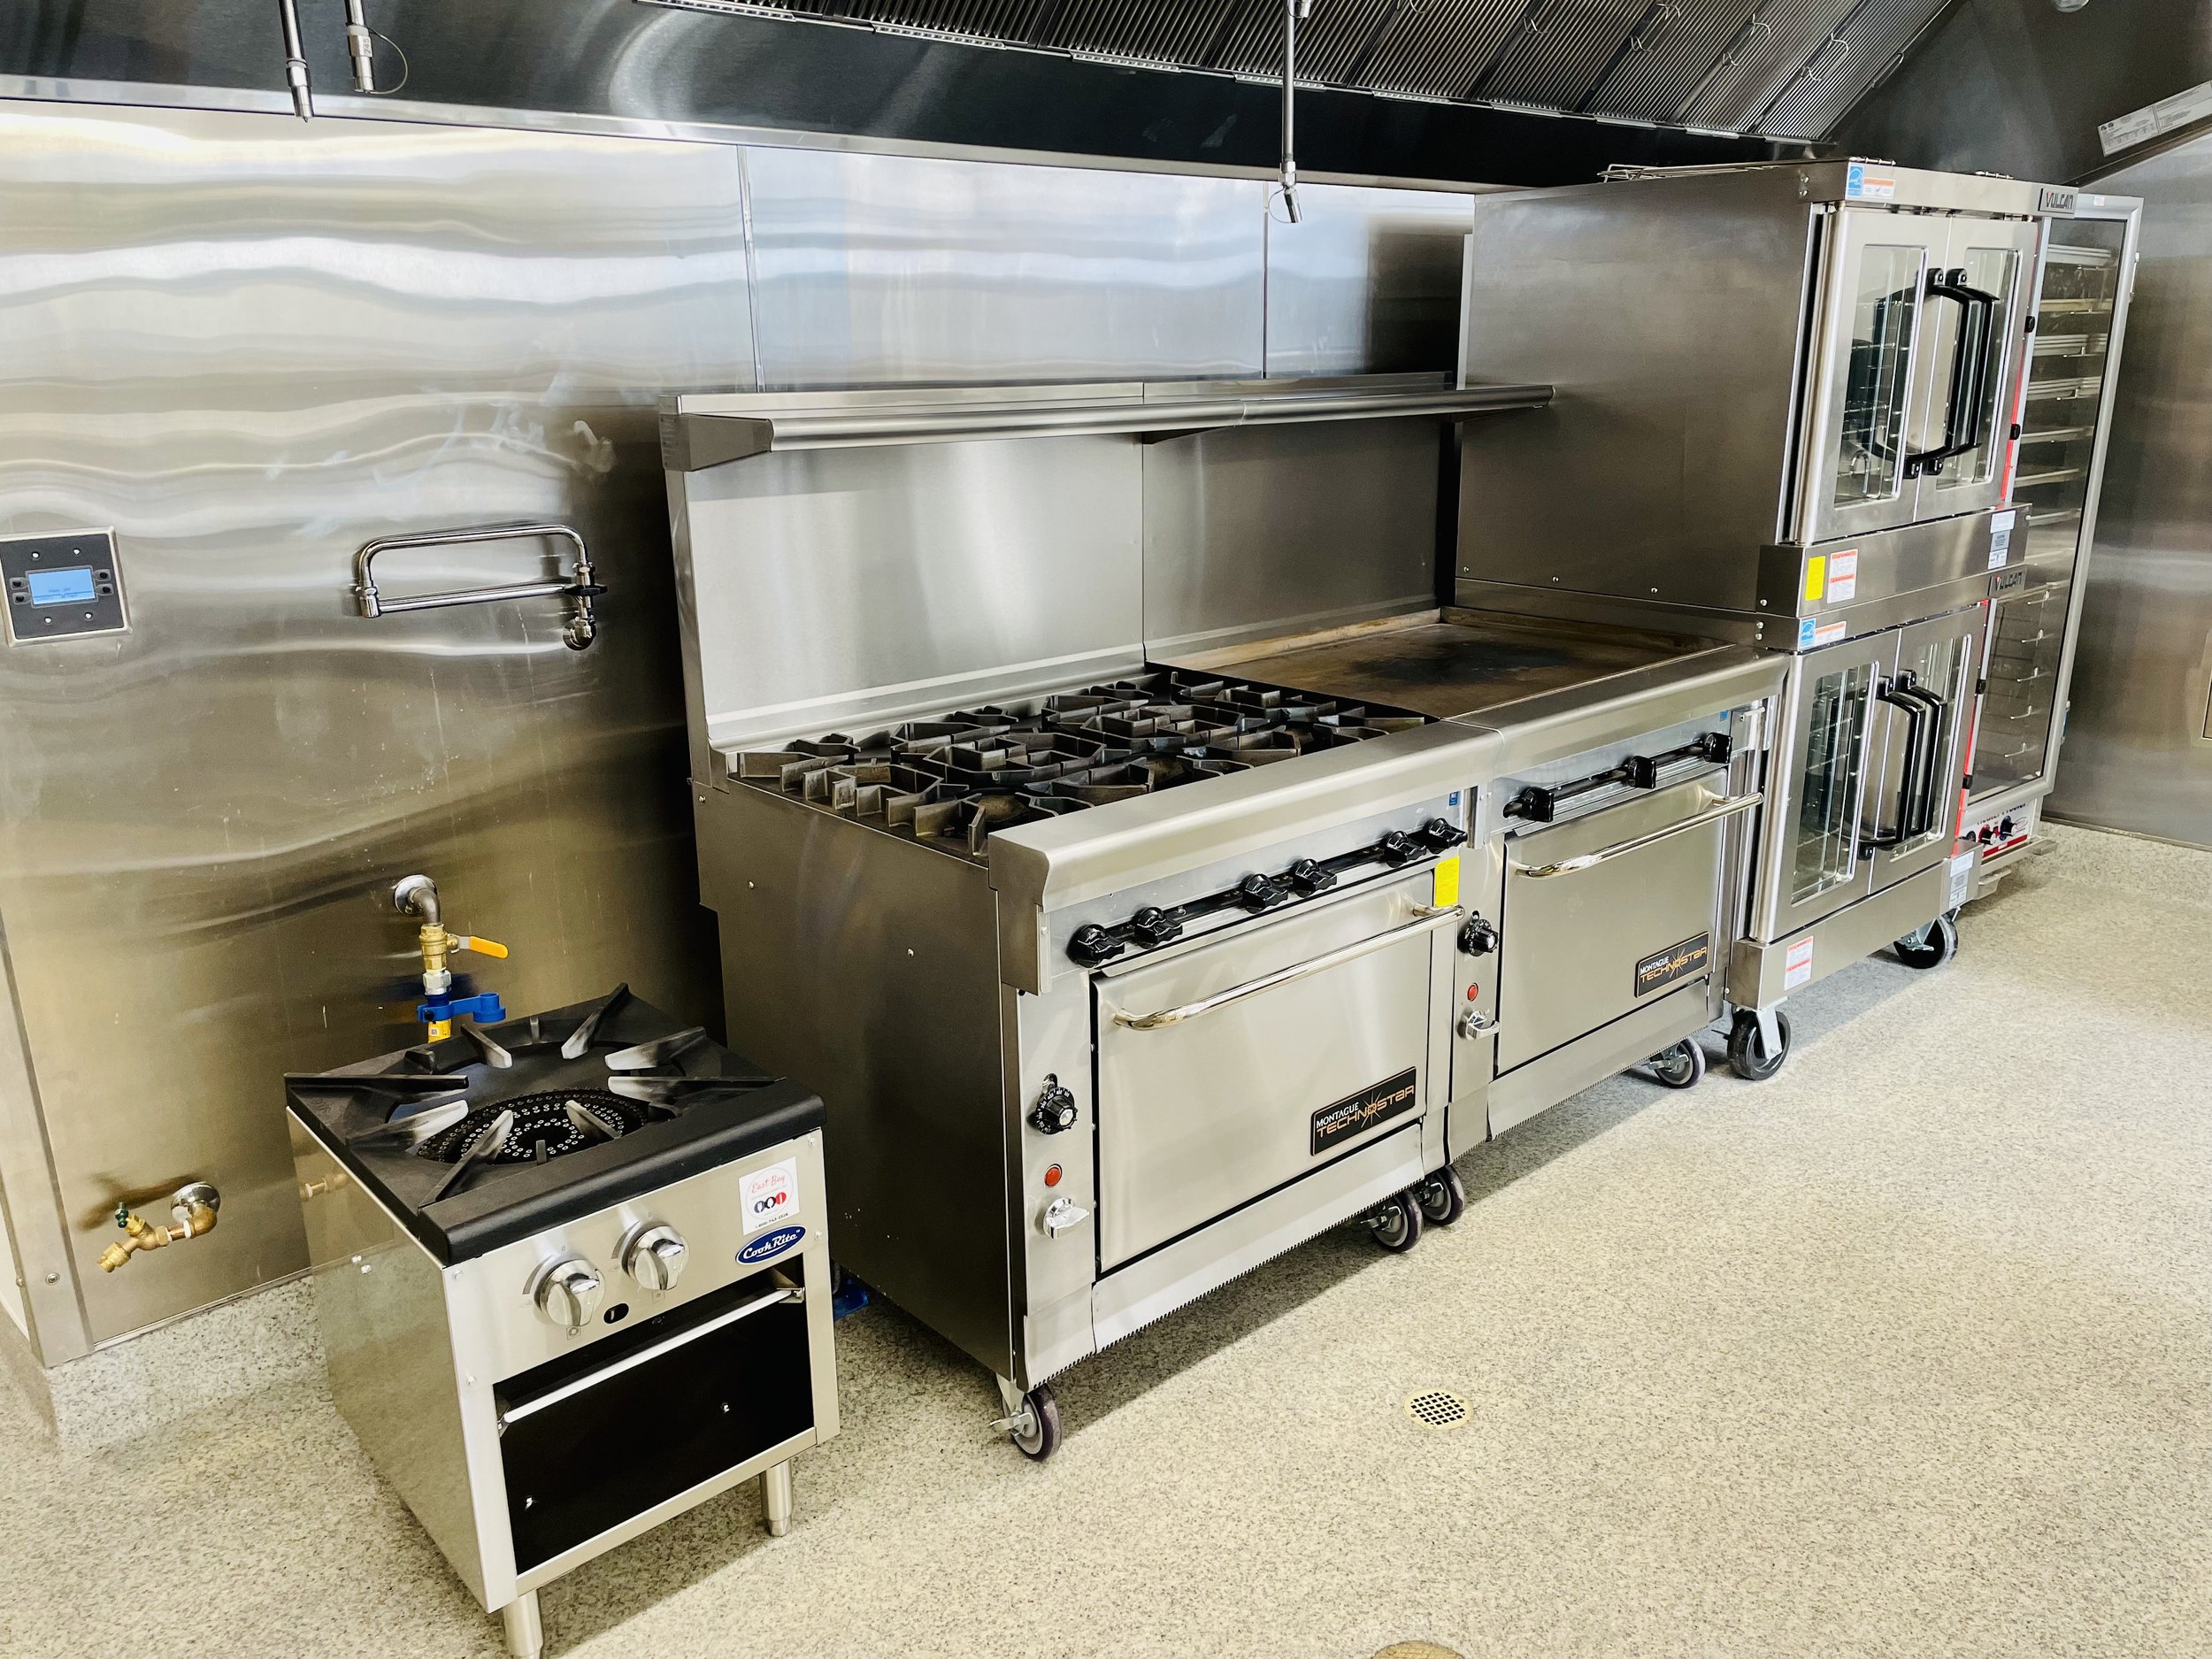 Commercial Kitchen with two large ovens, stove, griddle, convection ovens, warmer/proofer, and large pot stove